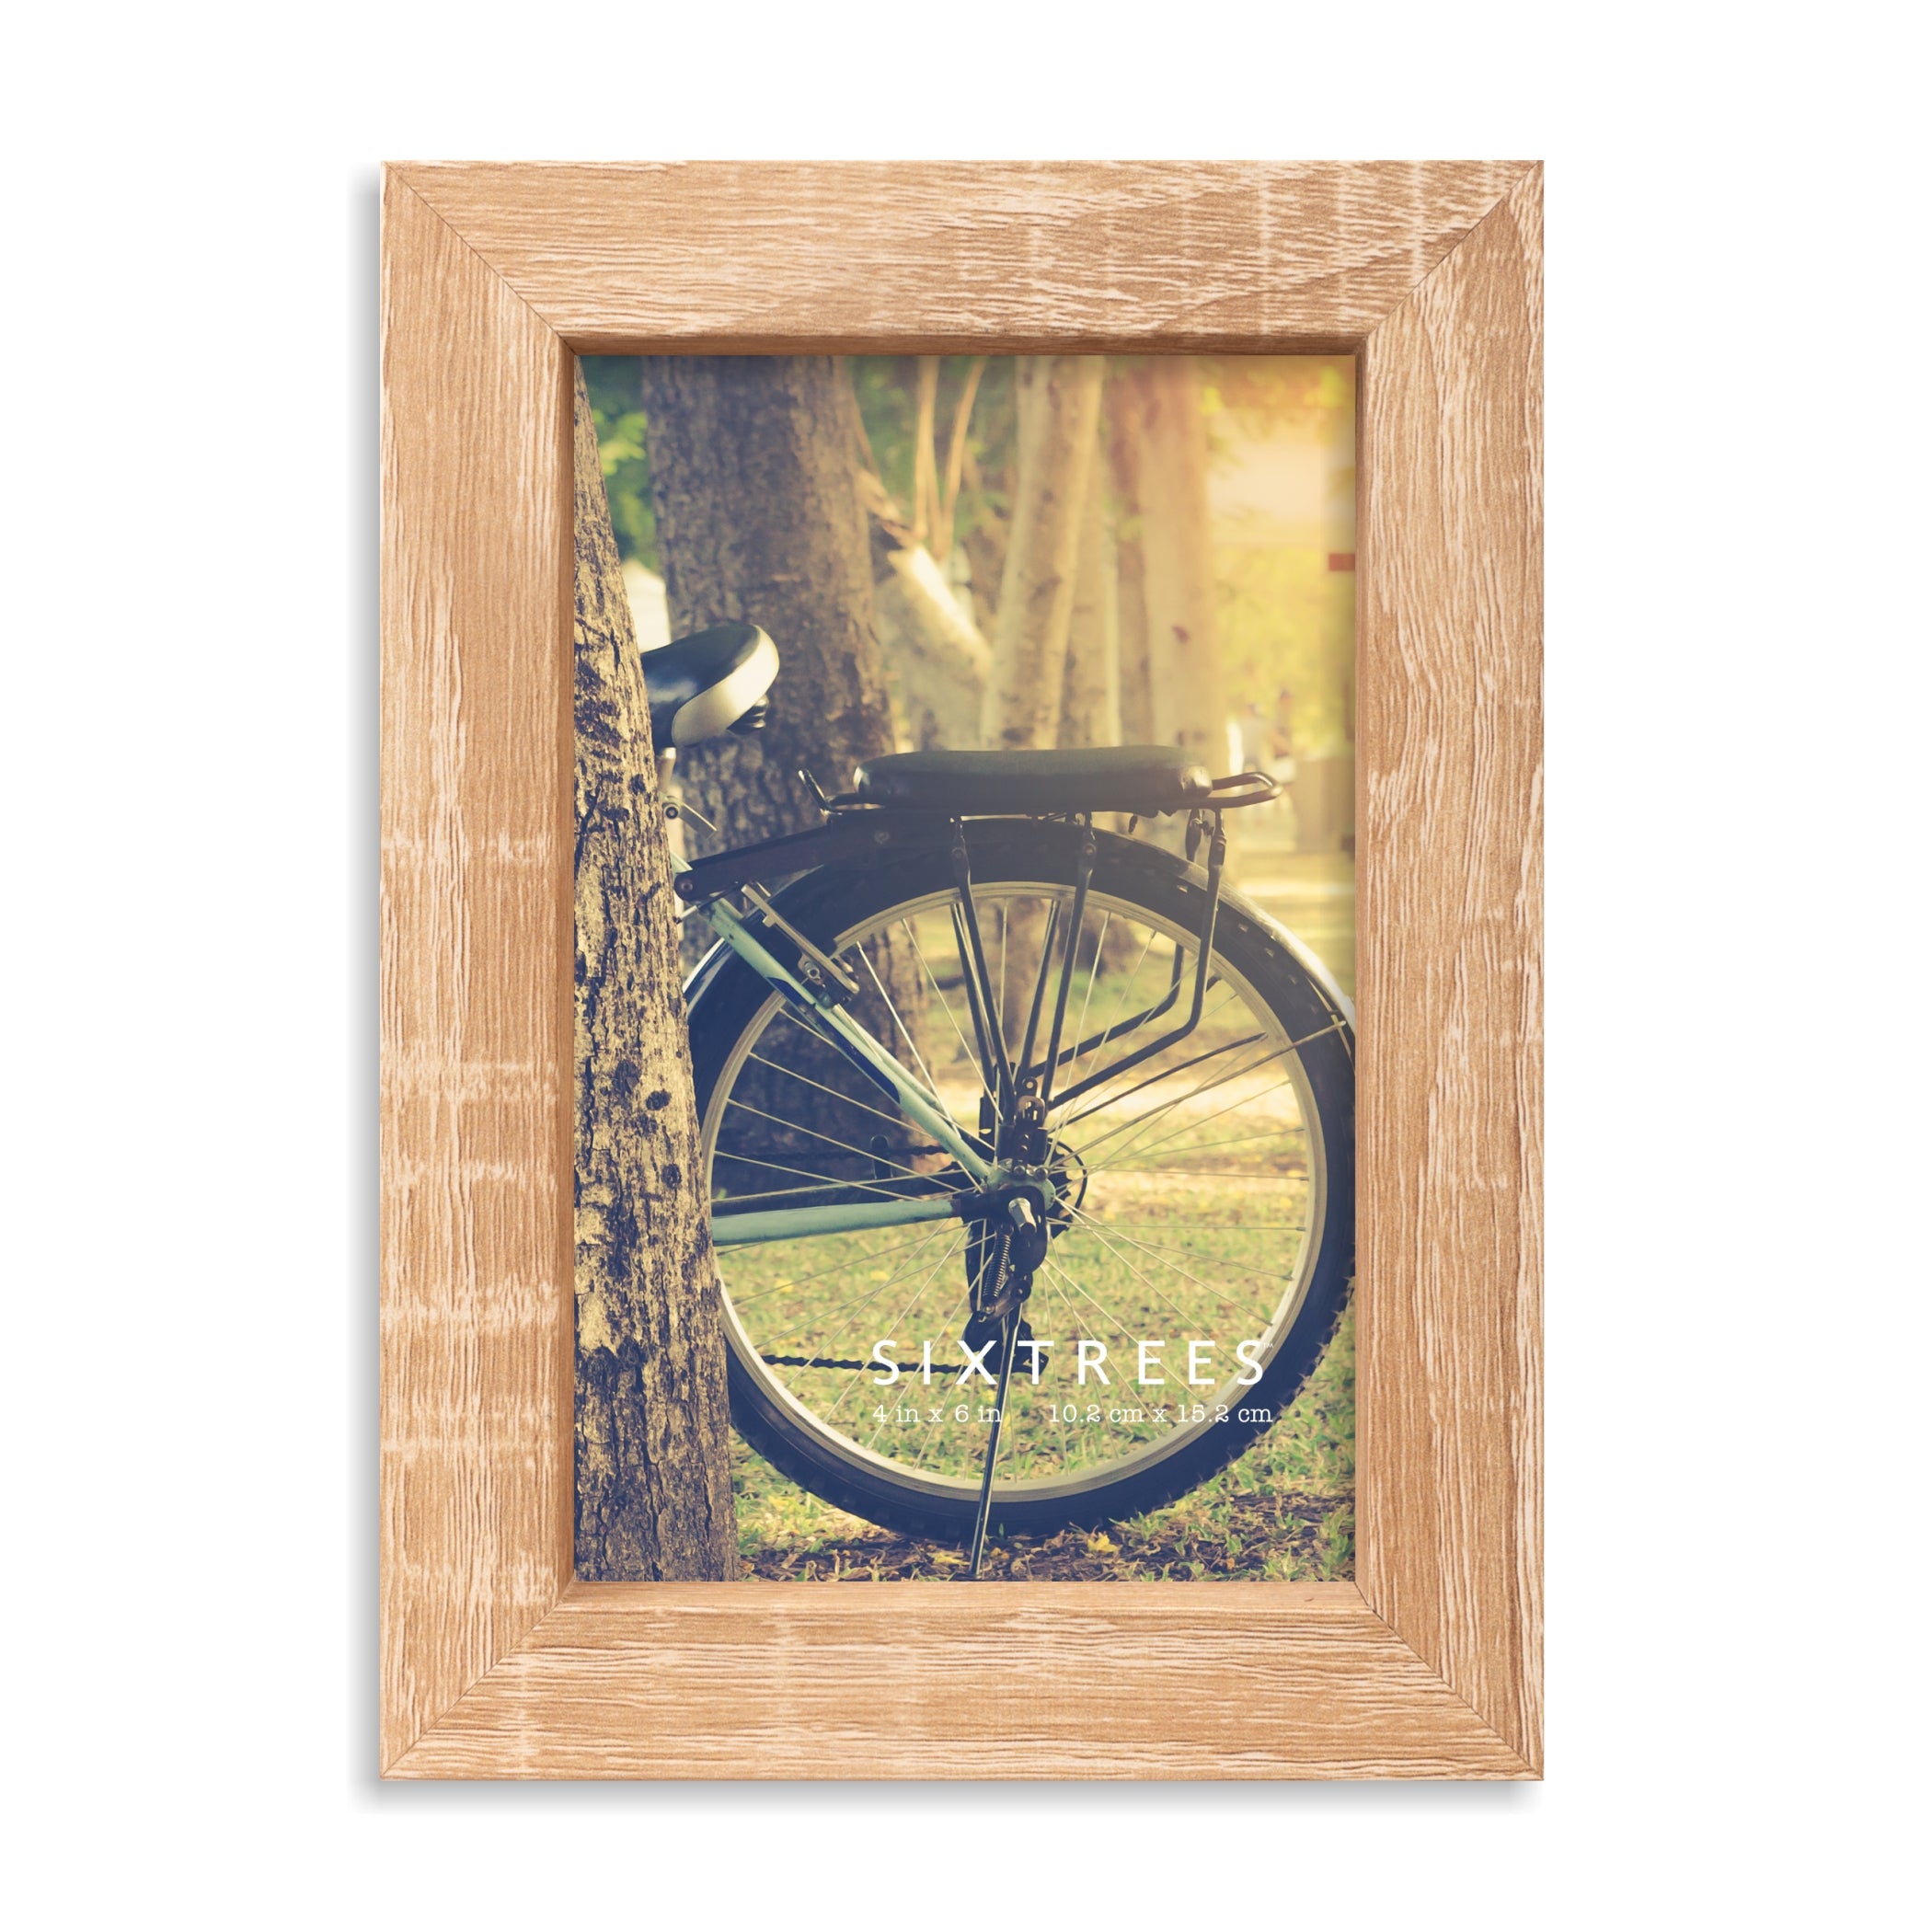 Provo Rustic Frame - 4X6, 5X7, 8X10 Picture Frame – Sixtrees